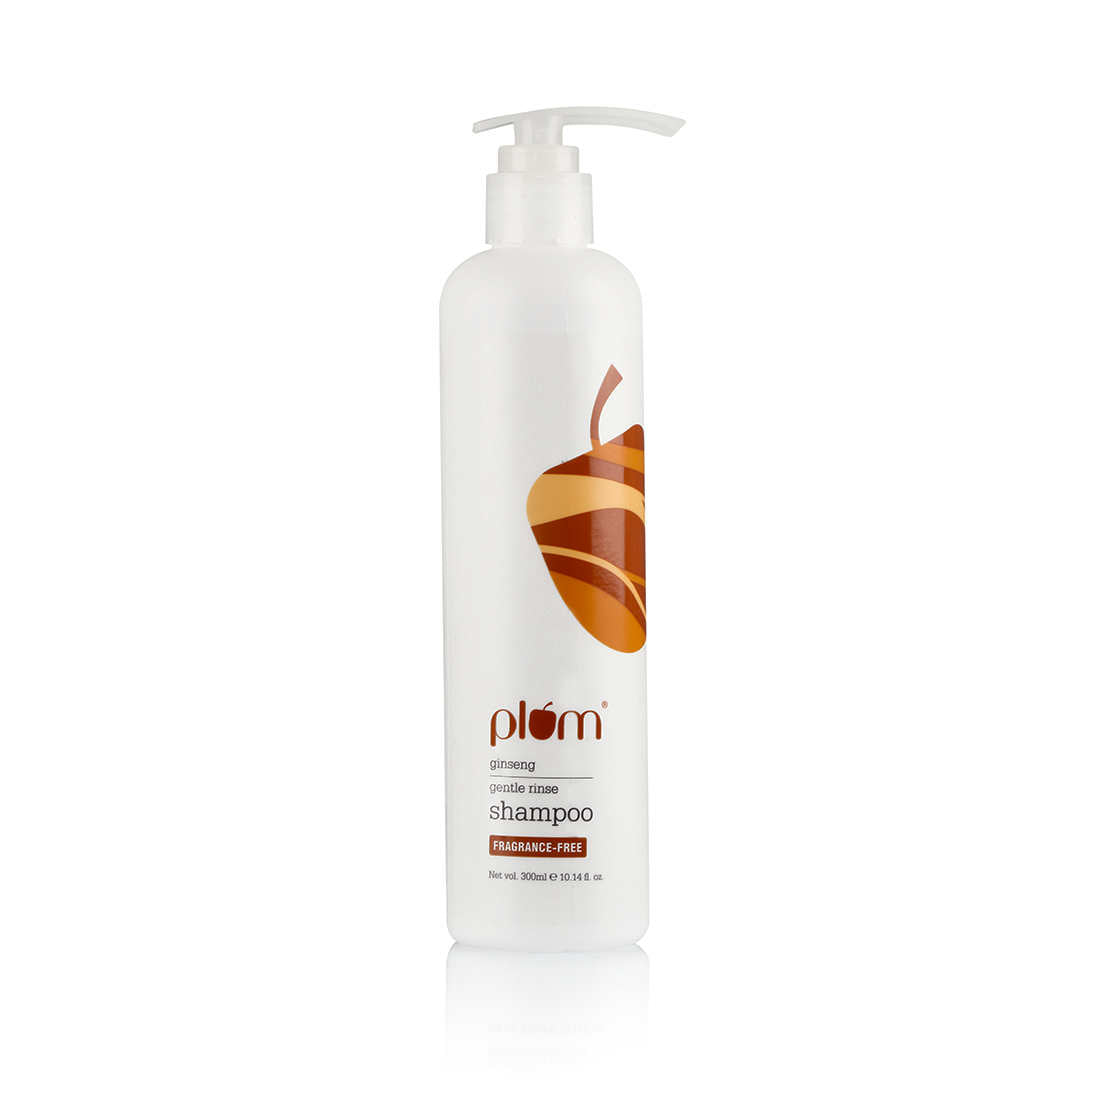 Shop Plum Ginseng Gentle Rinse Shampoo to Control Hair Fall and Promote Hair Growth on Sublime Life. Suitable for Hairfall control.